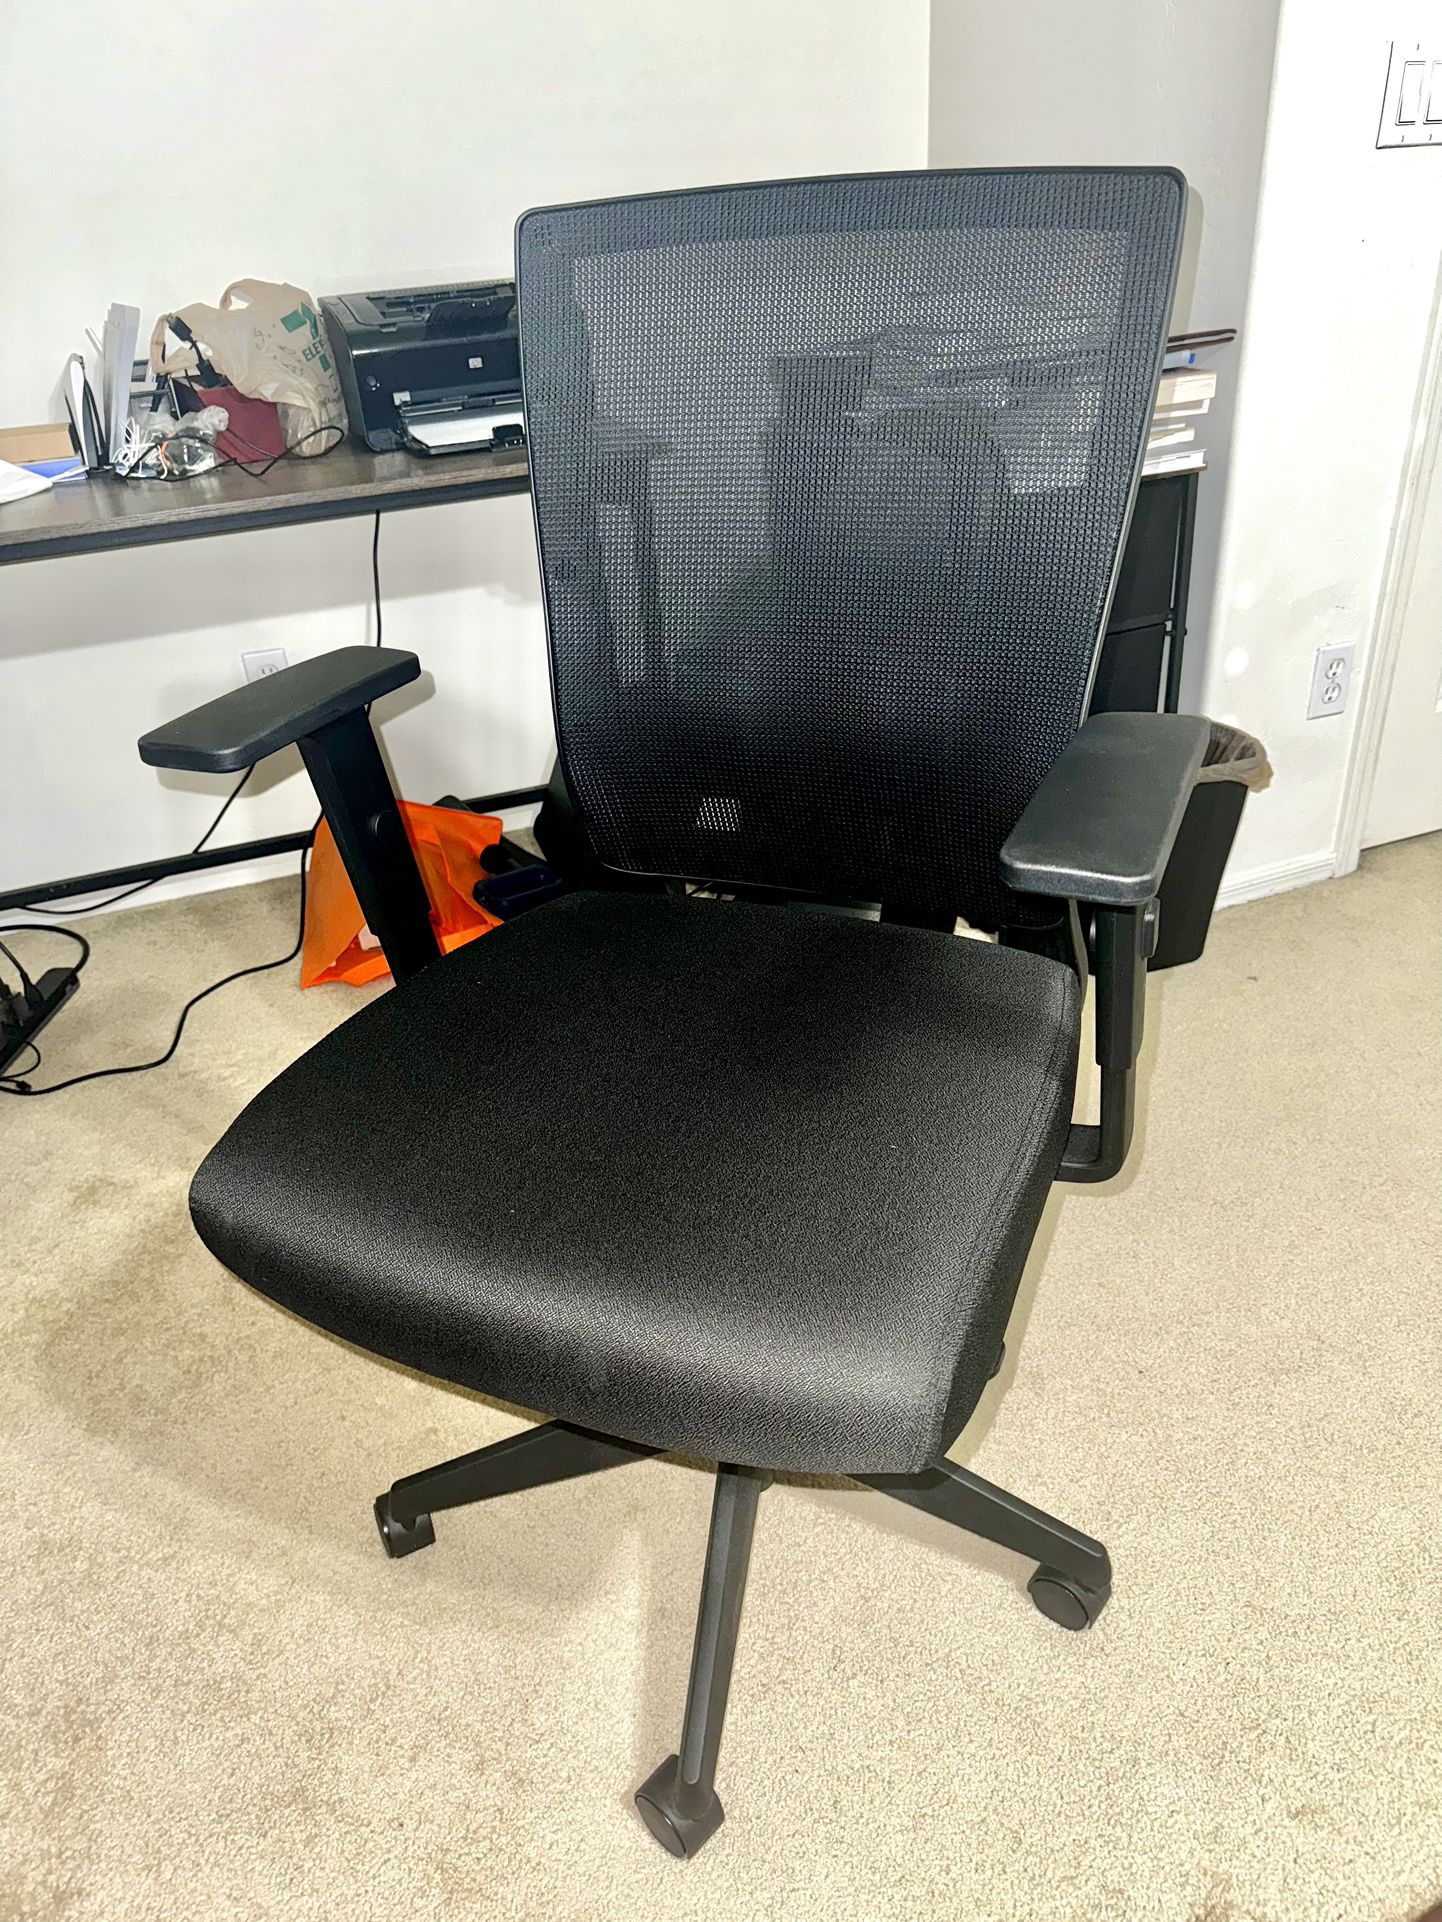 Black office rolling chair